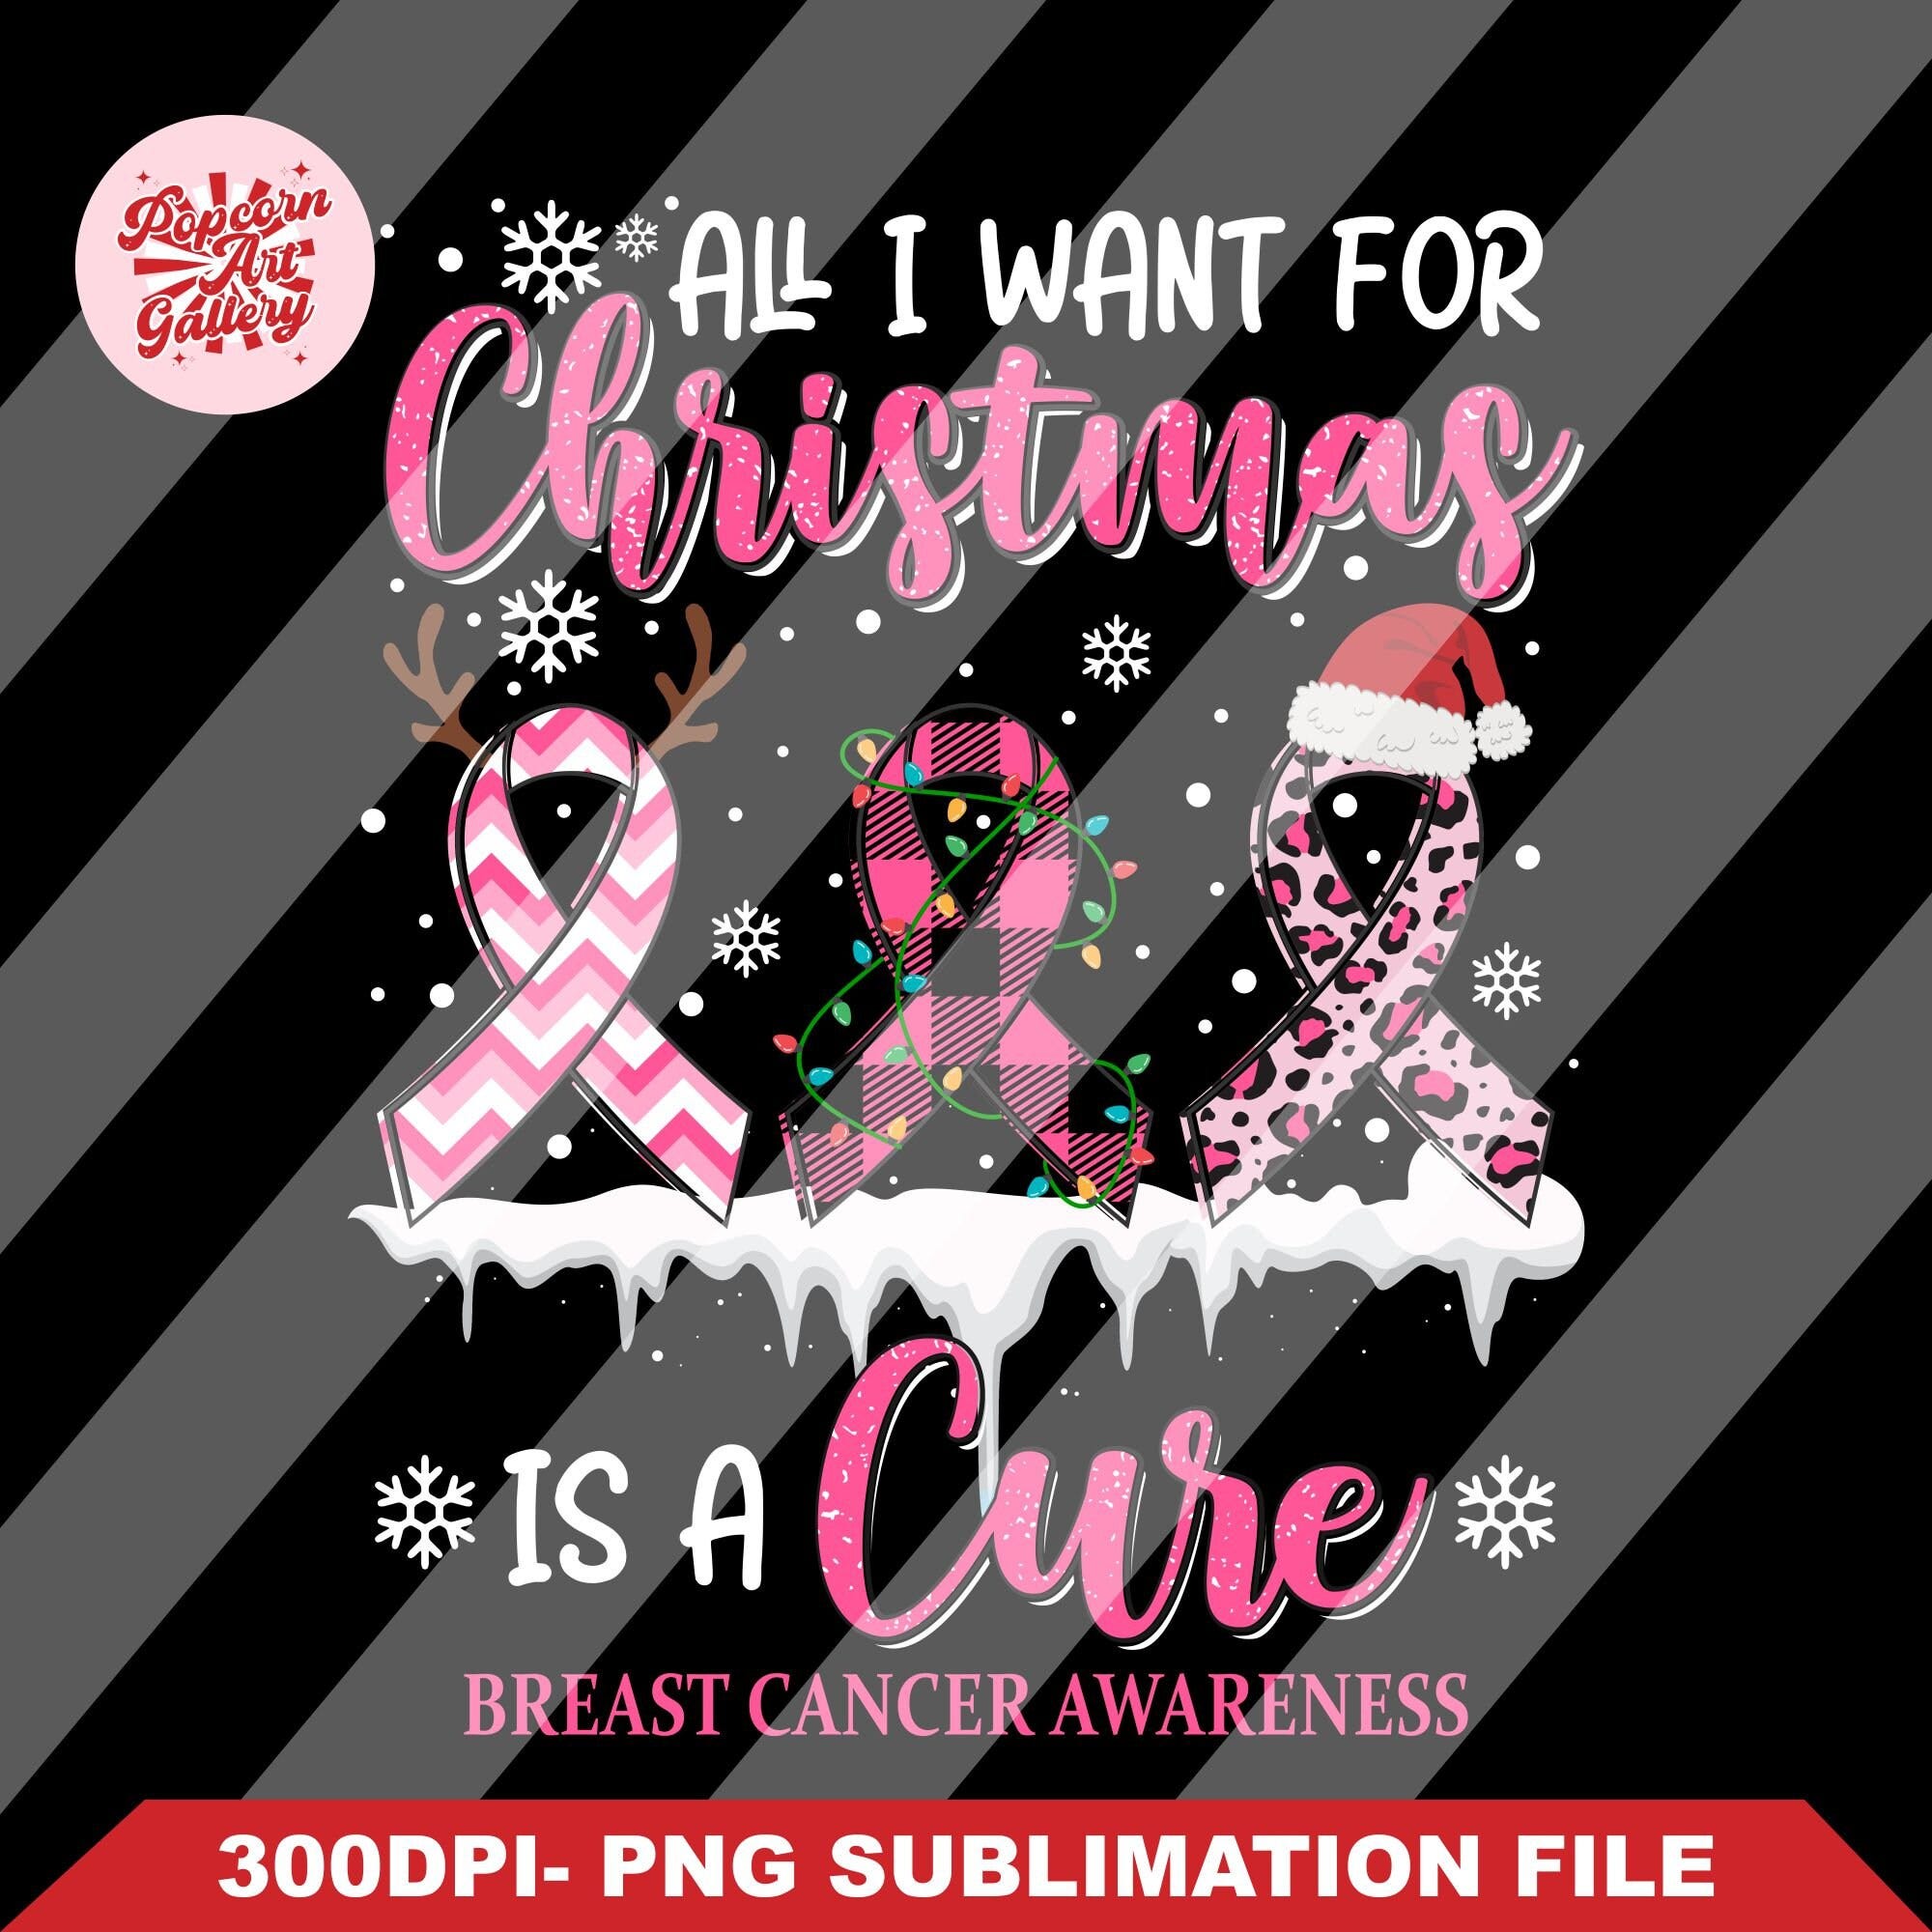 All i want for Christmas is a cure Breast Cancer Png, Breast cancer awareness, Cancer awareness, Pink ribbon png, cancer ribbon Png